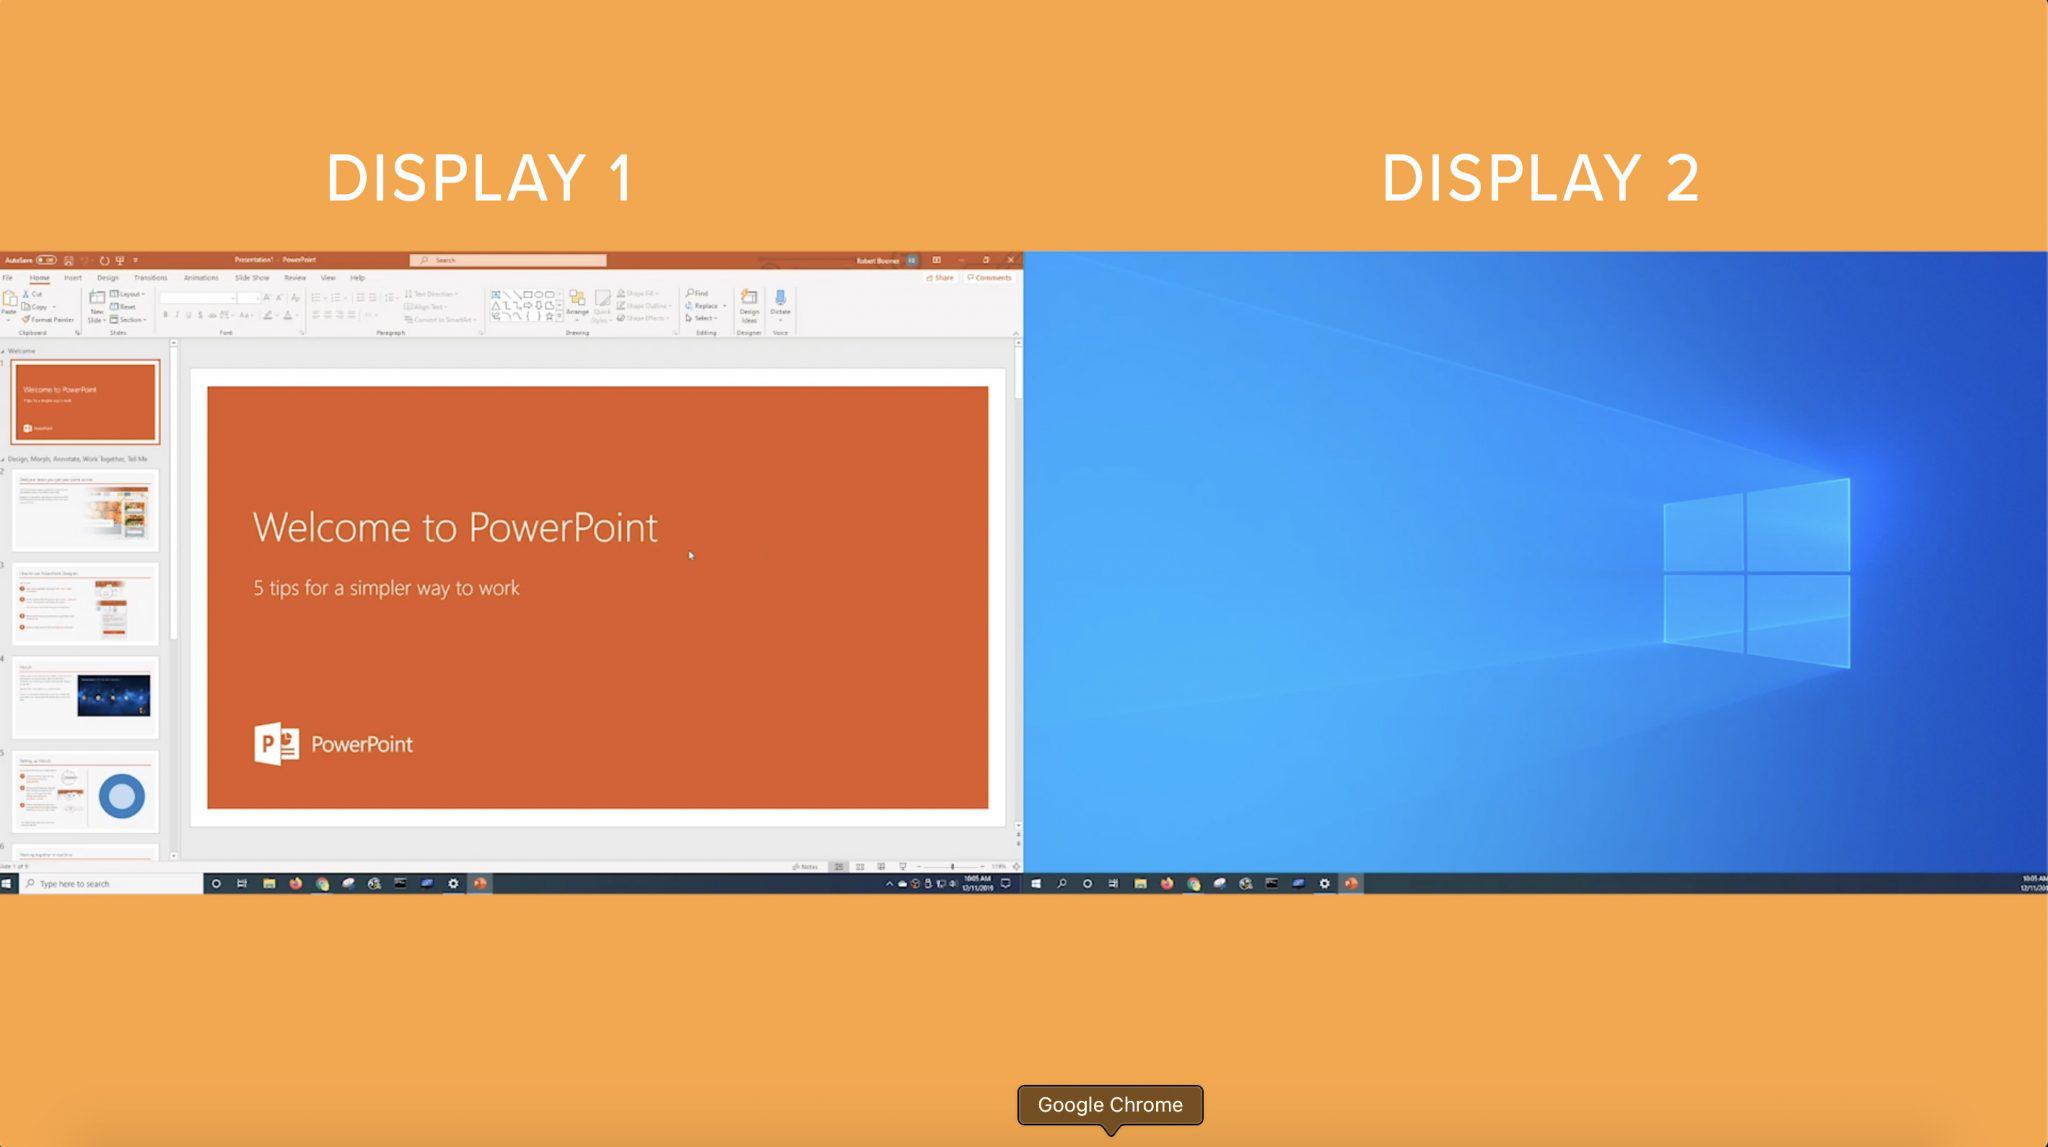 Display 1 showing Powerpoint and display 2 showing an empty desktop